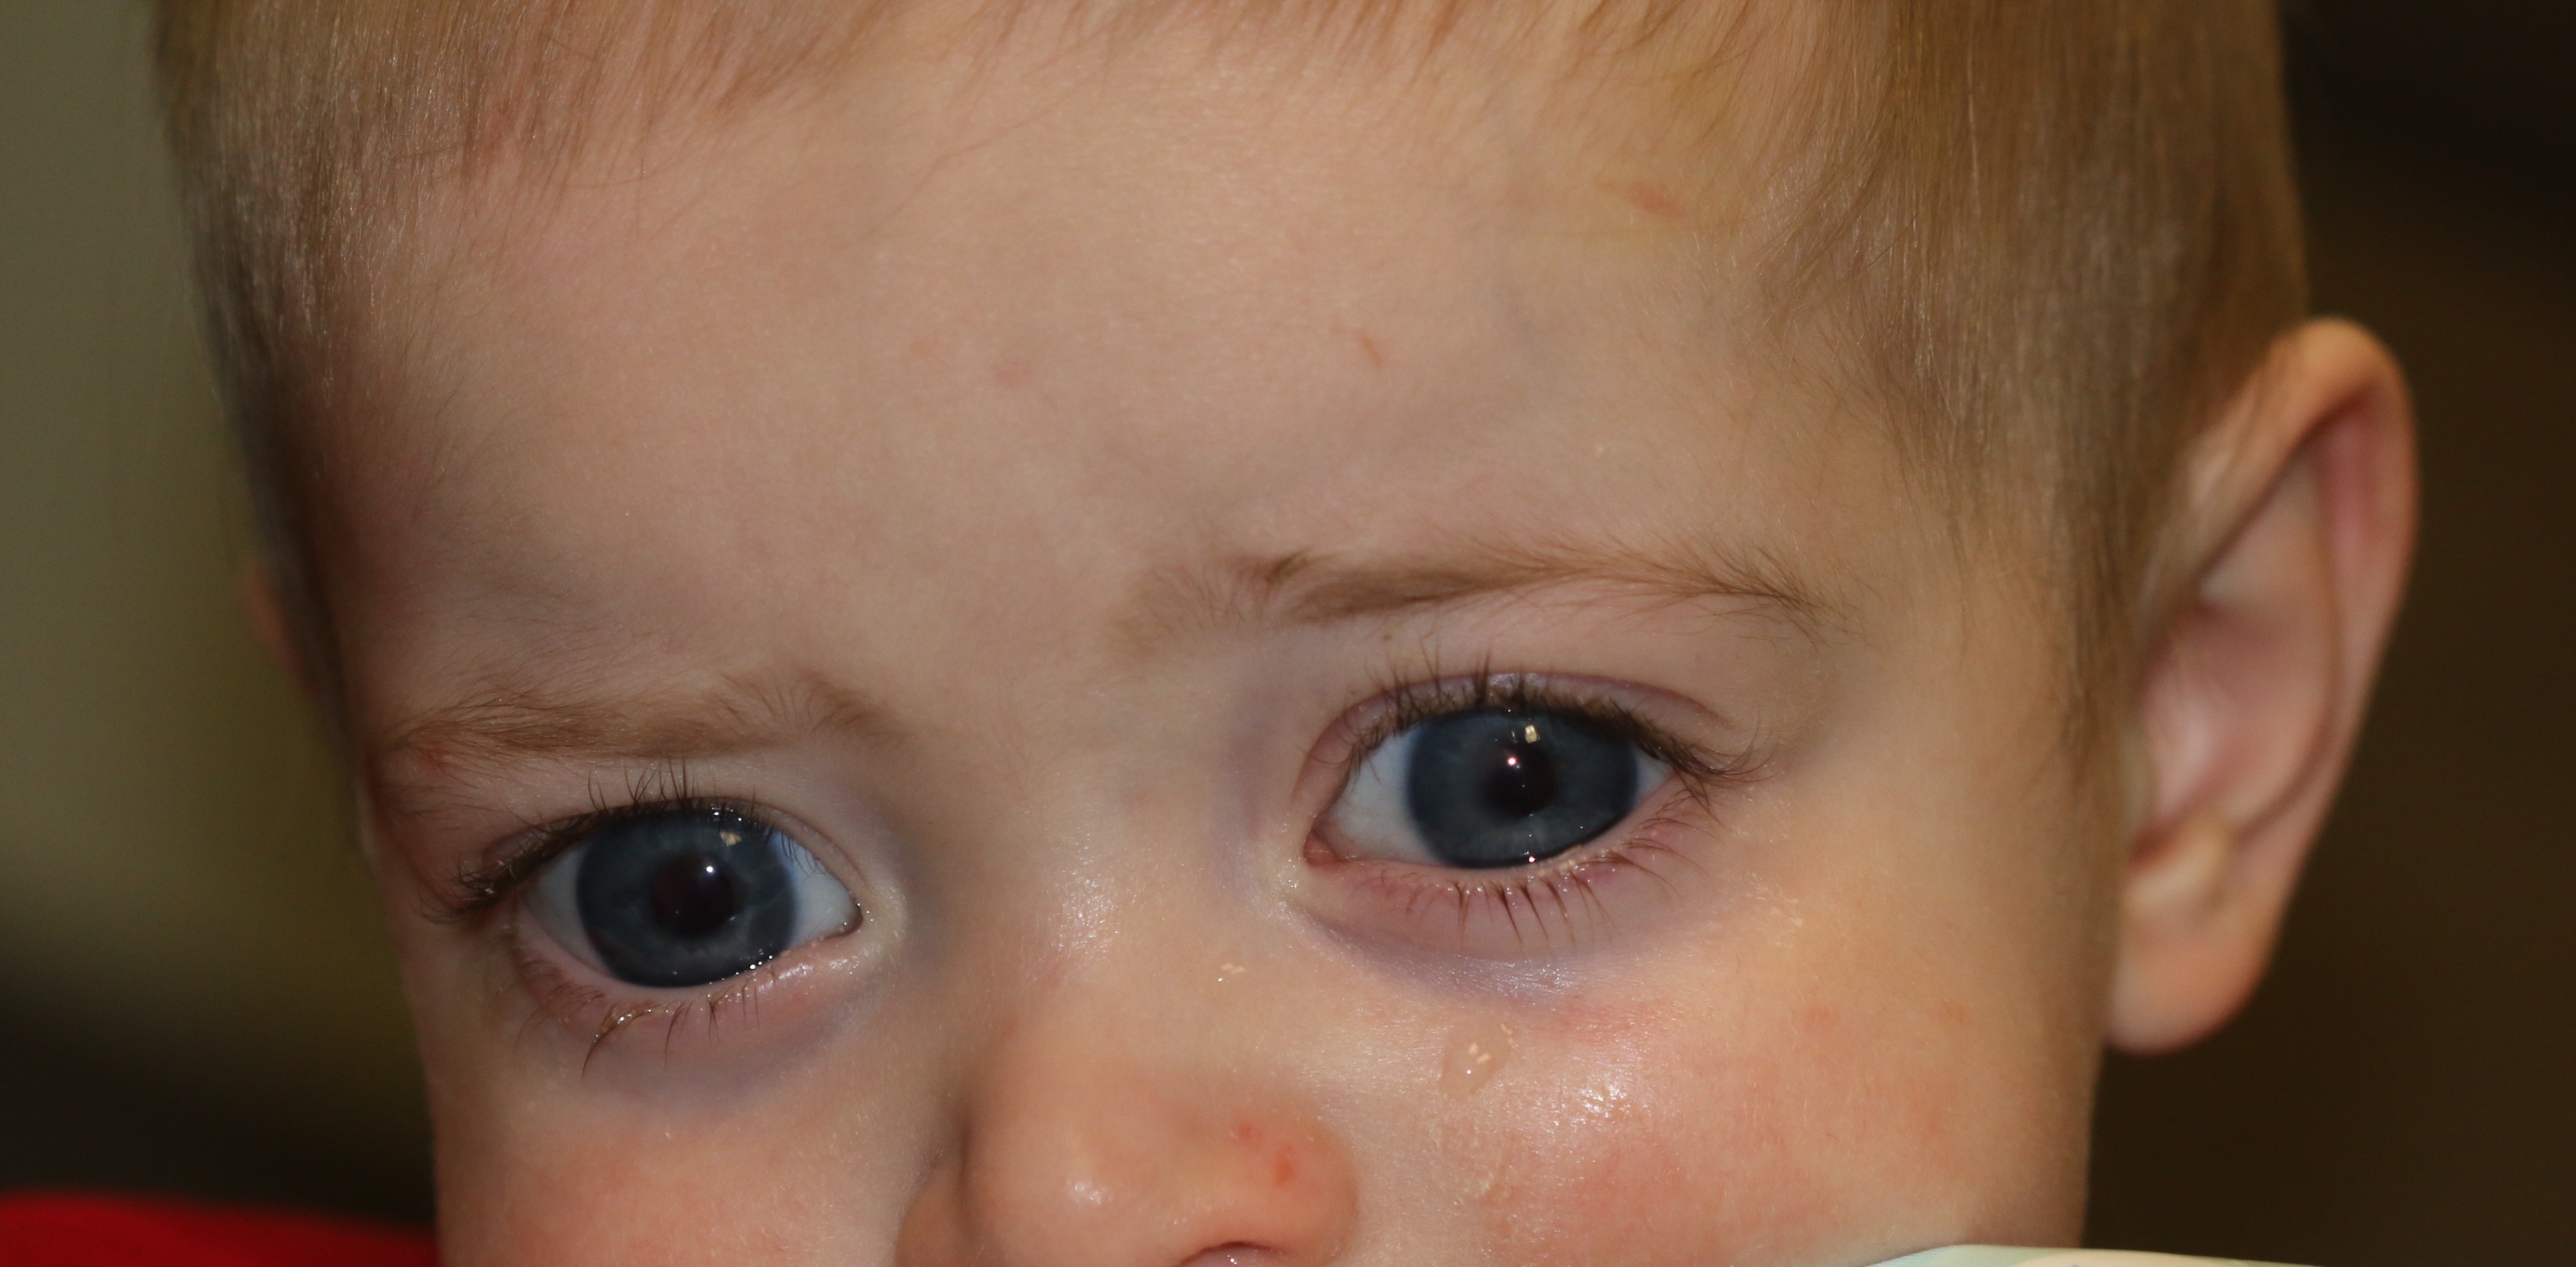 Buphthalmos in a 9-month-old male who presents with bilateral tearing and light sensitivity